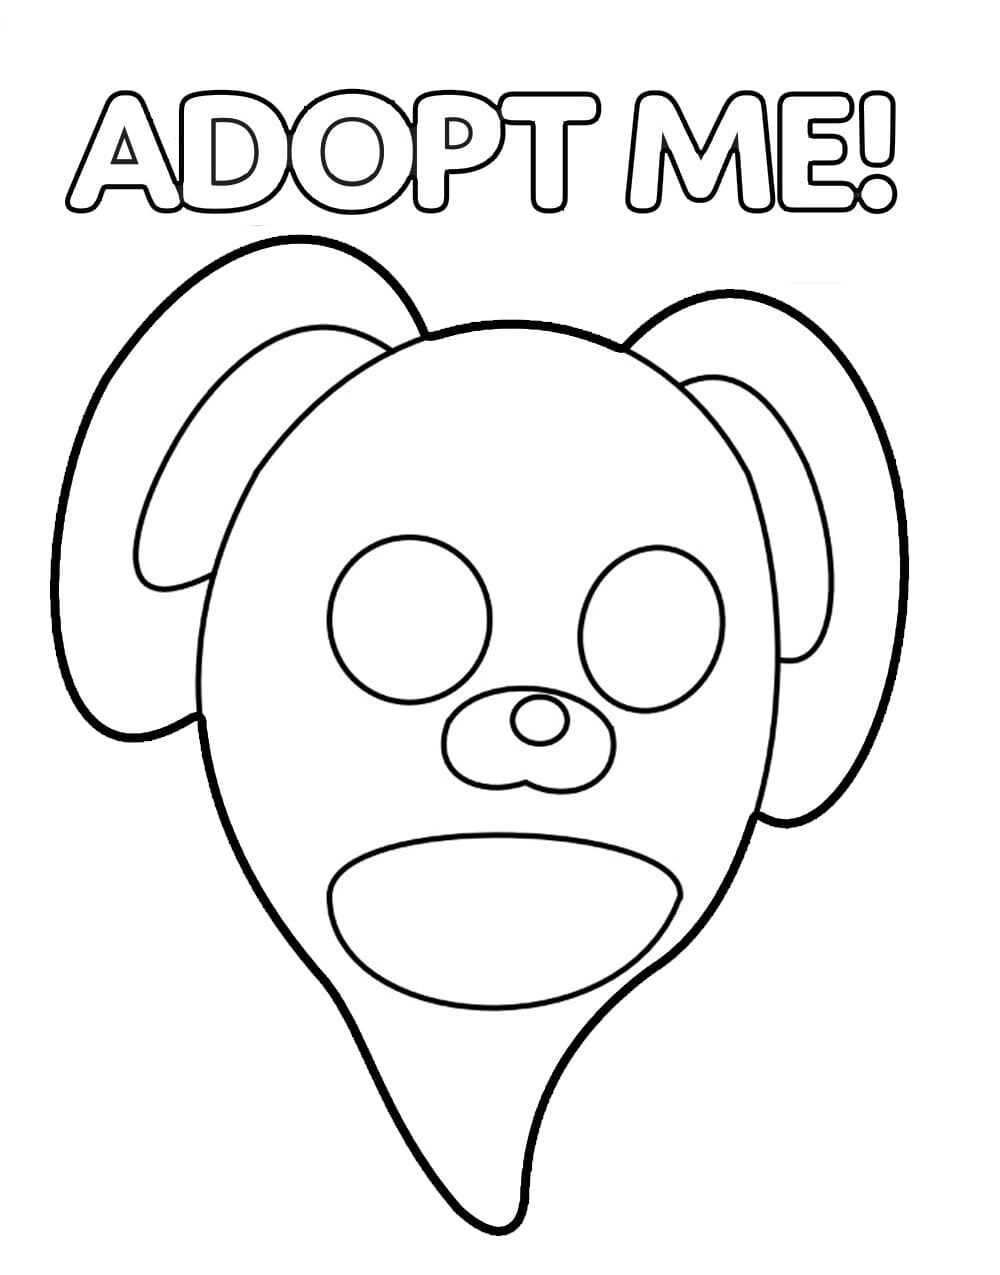 Unicorn Coloring Pages Adopt Me / Coloring Page Roblox Adopt Me Unicorn